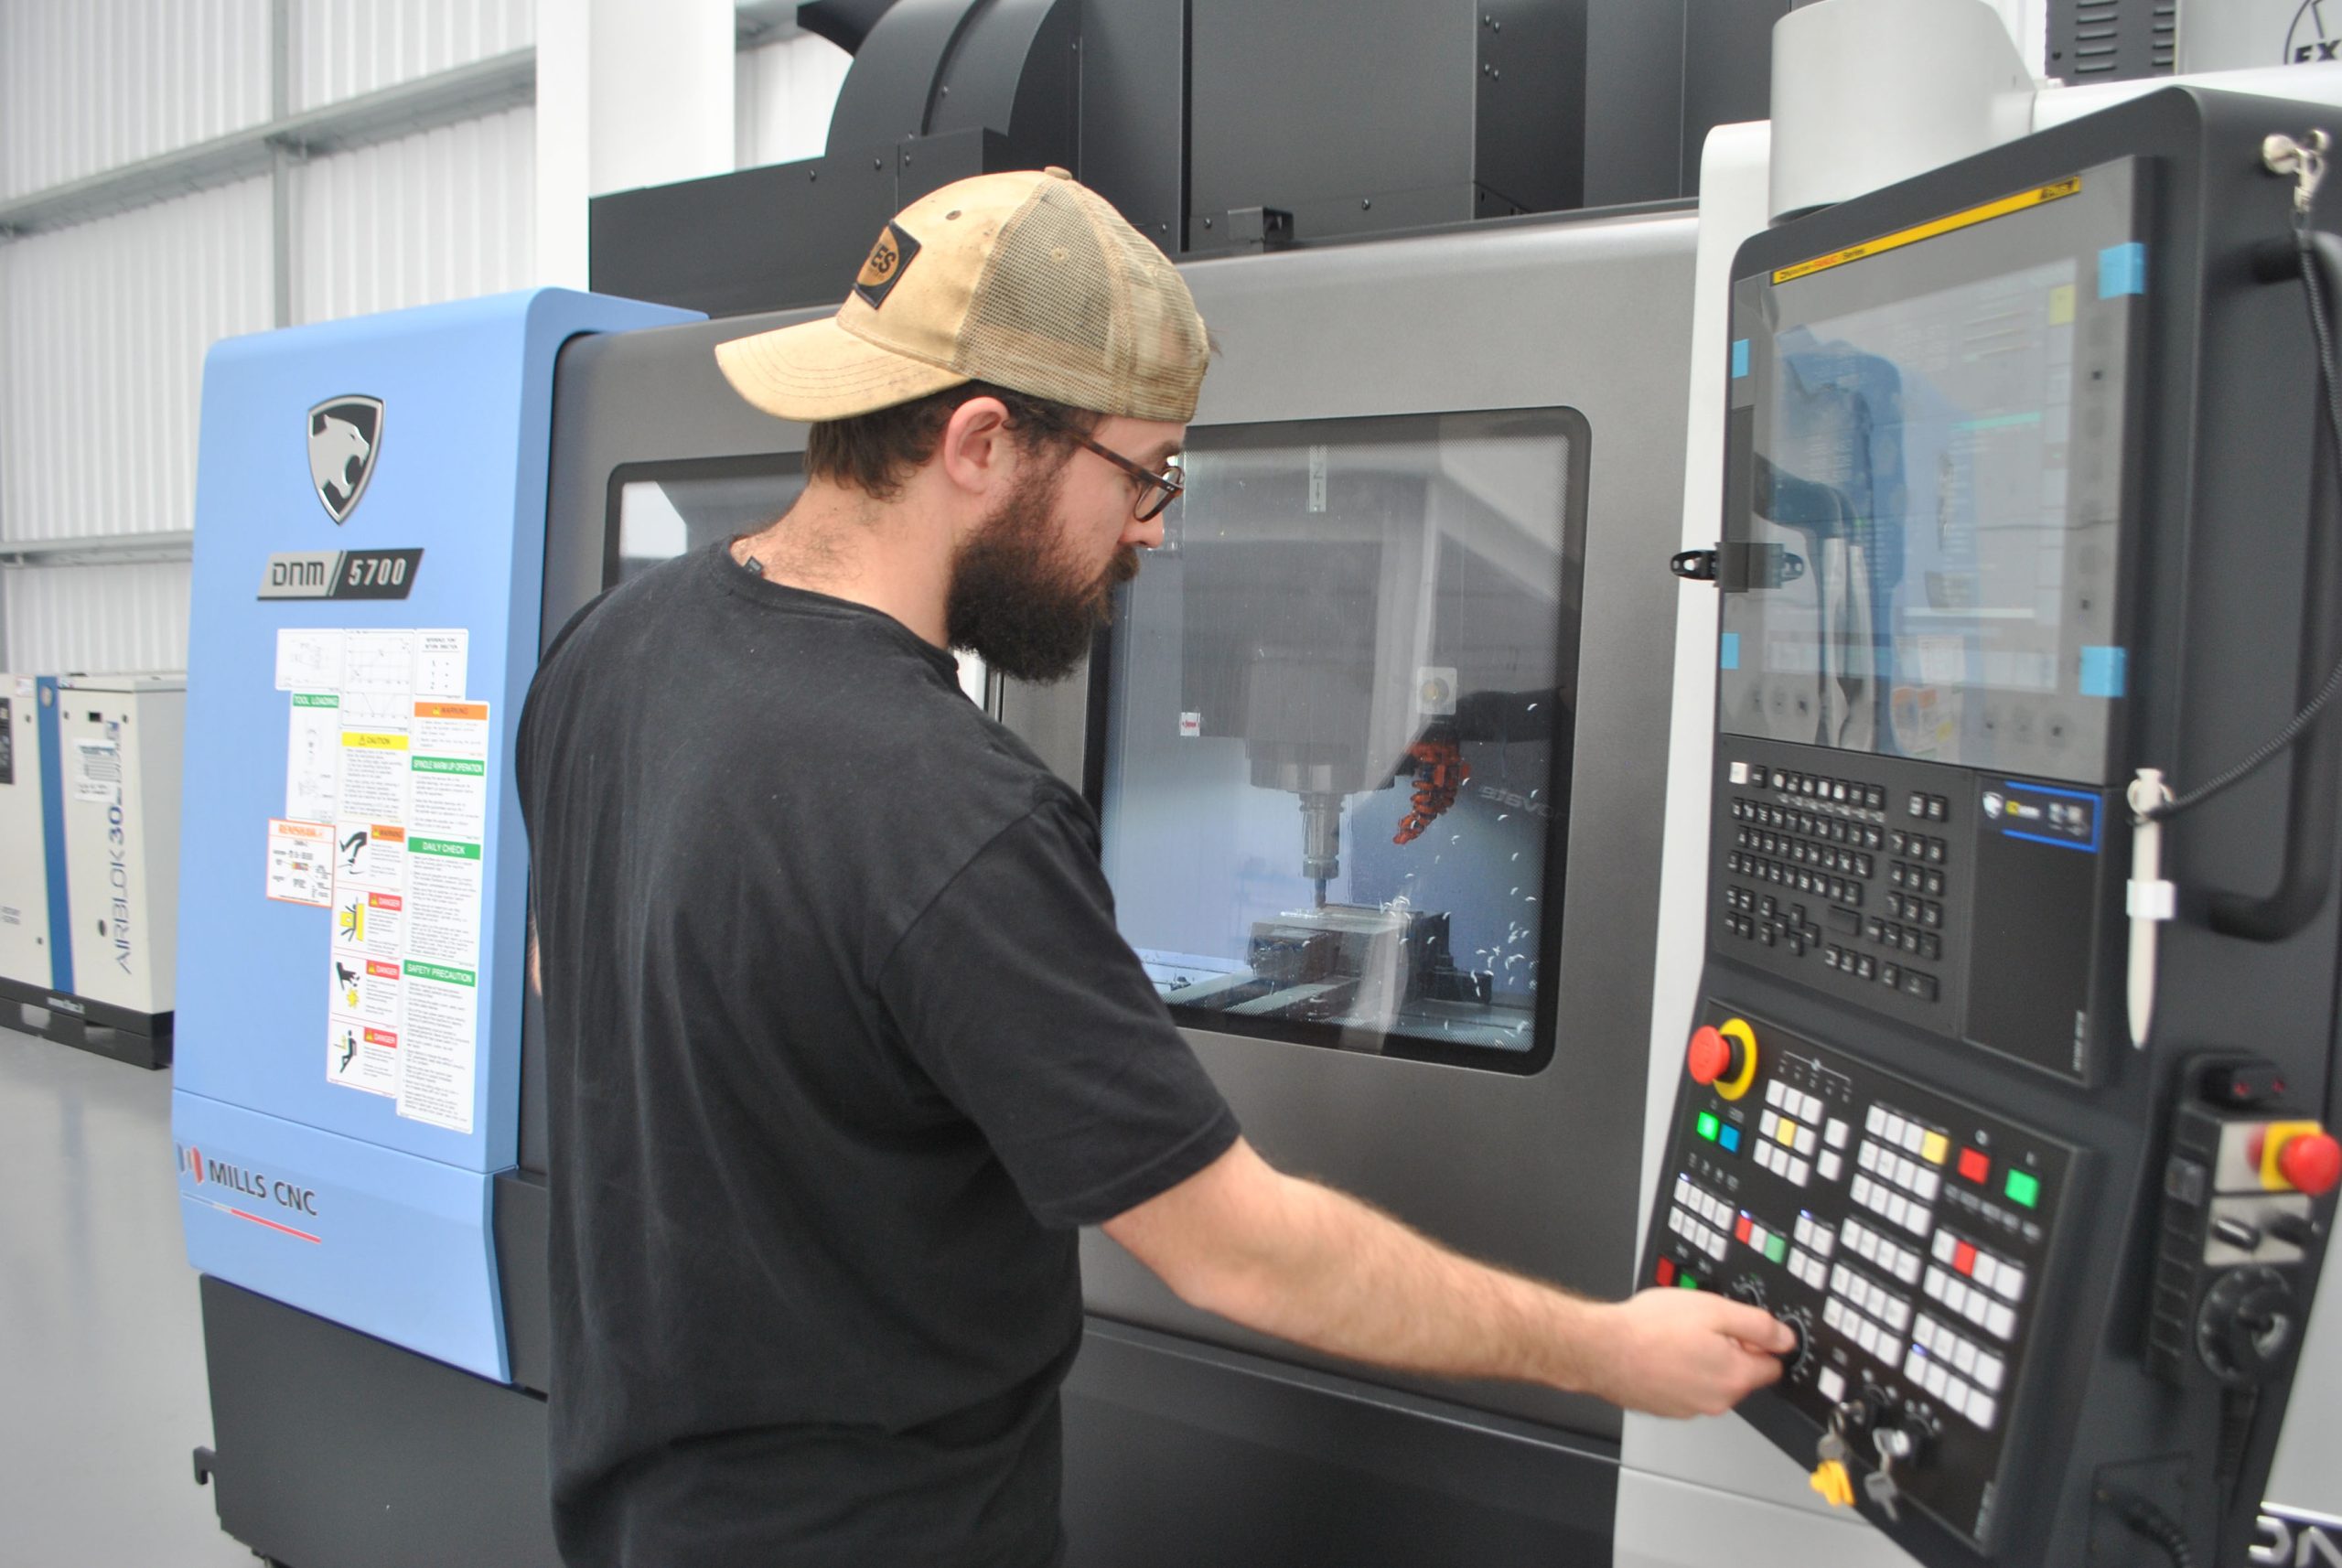 Operator manning a DN Solutions DNM 5700 machining centre